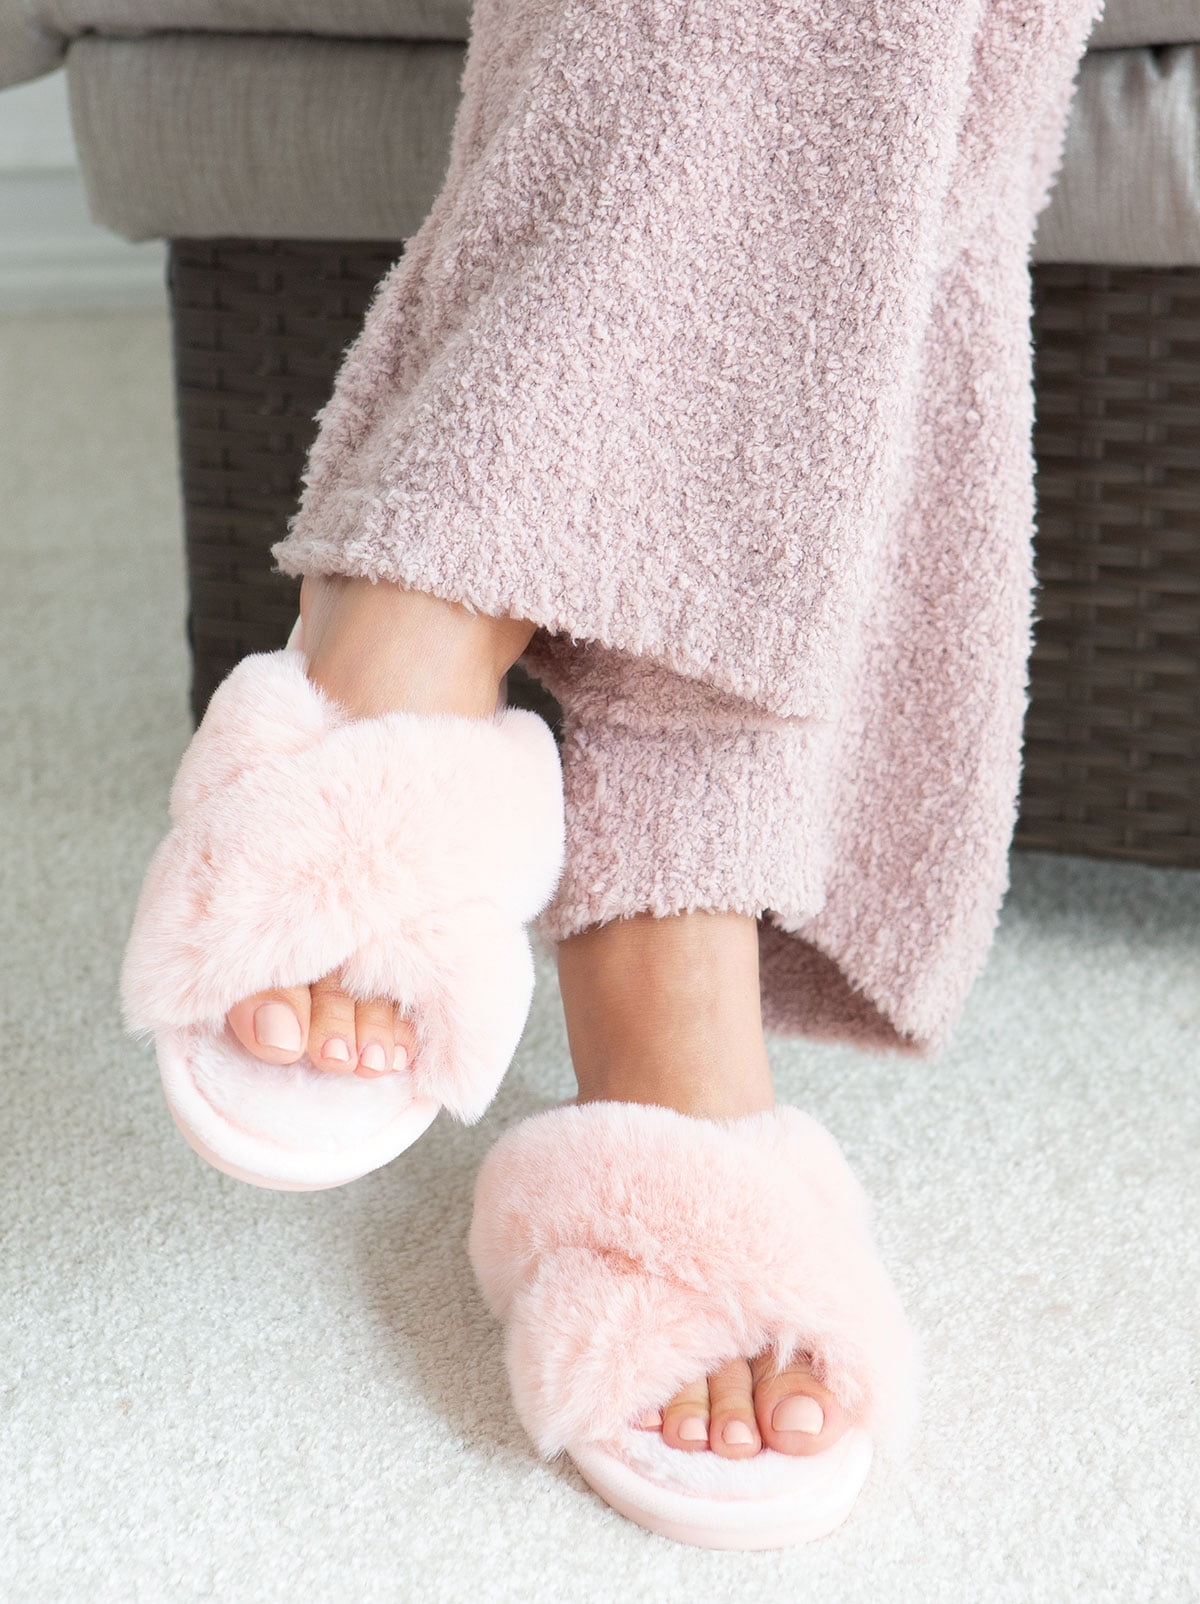 Buy VETEMENTS women black slippers with pink fur for $543 online on SV77,  UE51FL400P/2400